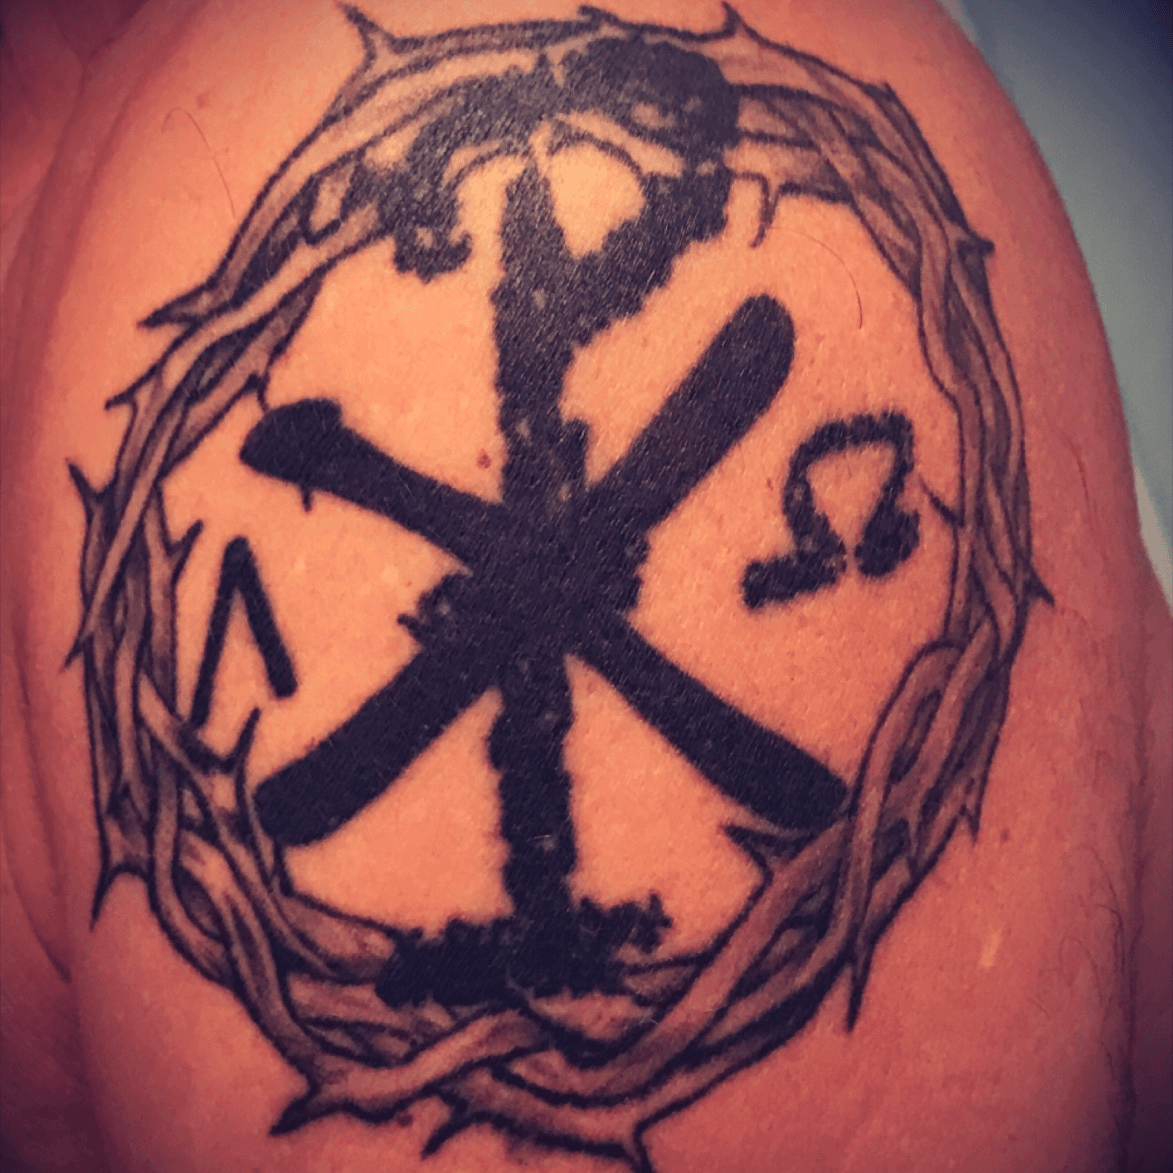 Disciple  disciplejoeys brand new tattoo representing Disciple and the Chi  Rho logo Each band member has their own version of the logo tattooed on  their arm Just one more member left